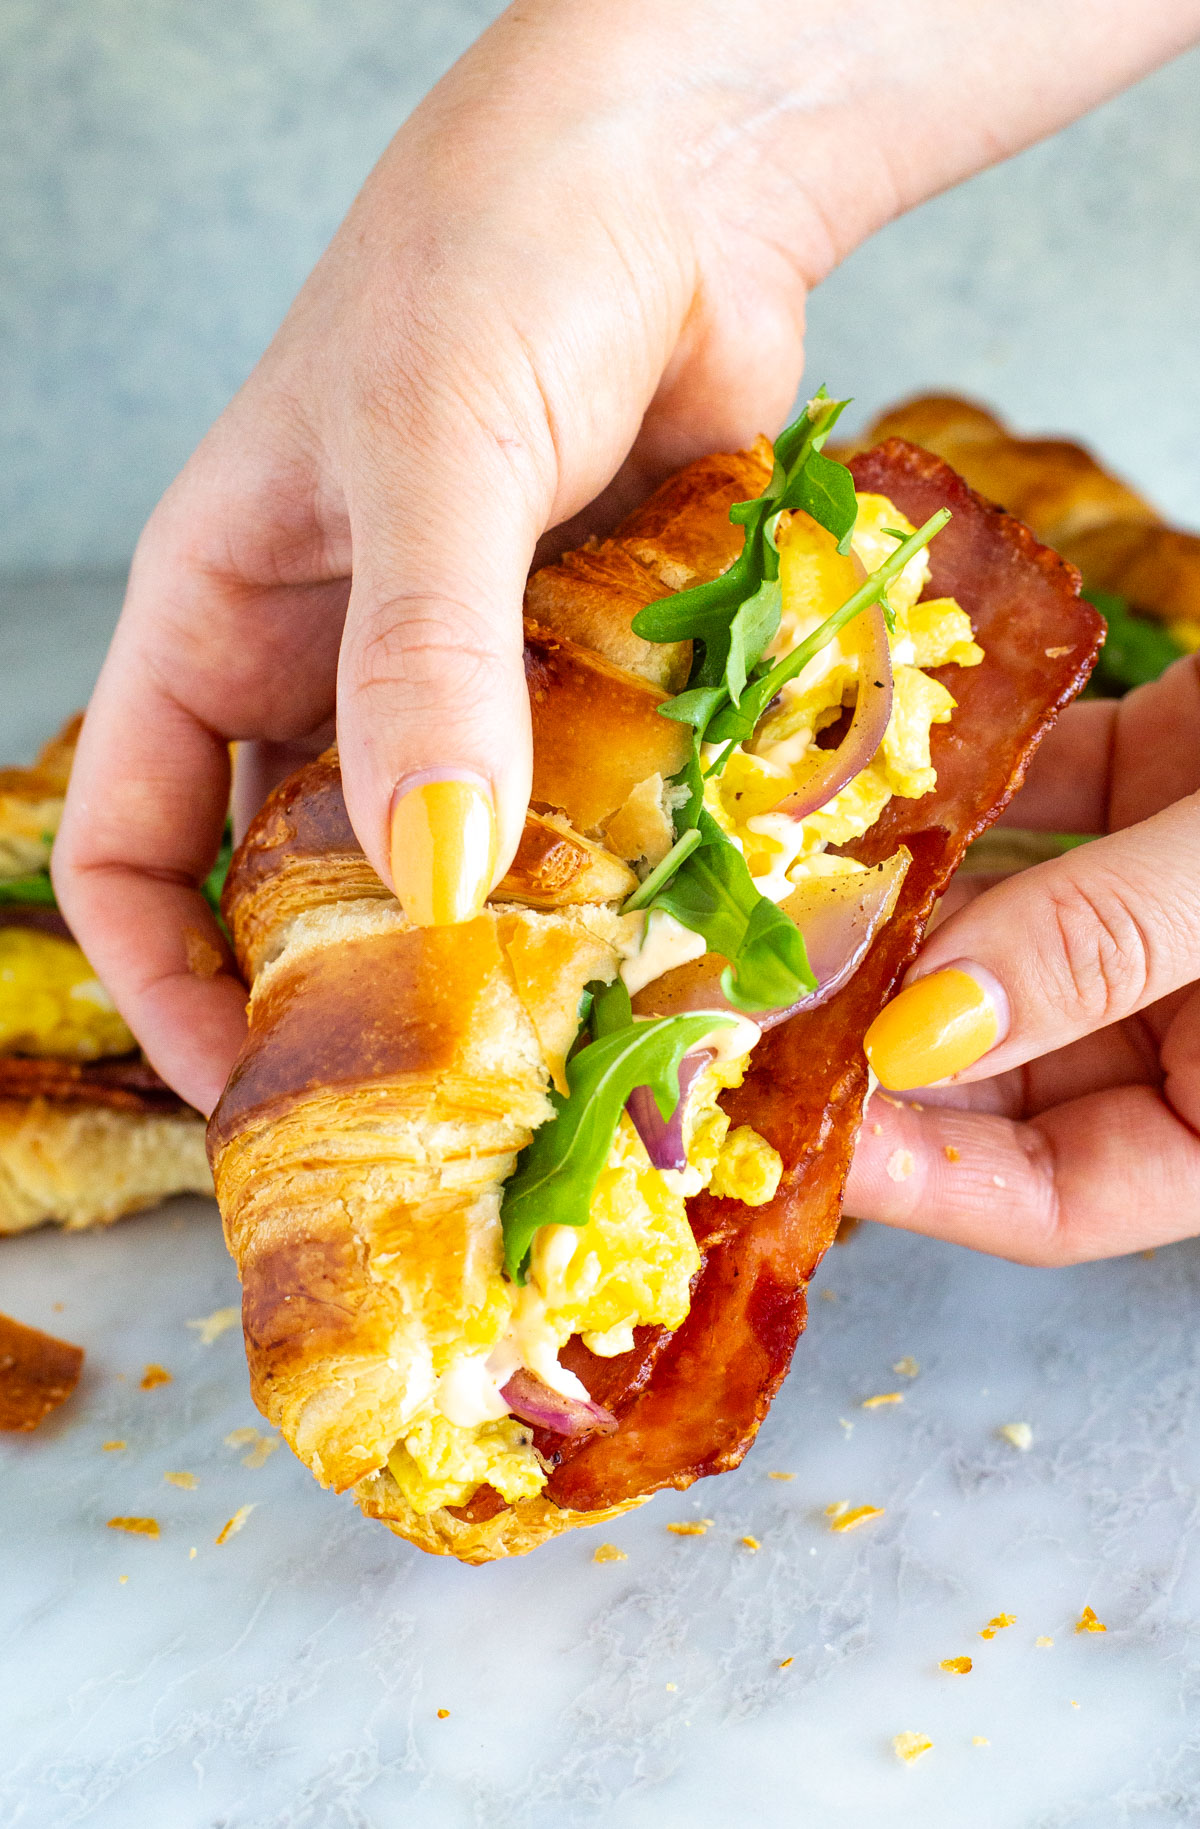 A hand holding a croissant breakfast sandwich.